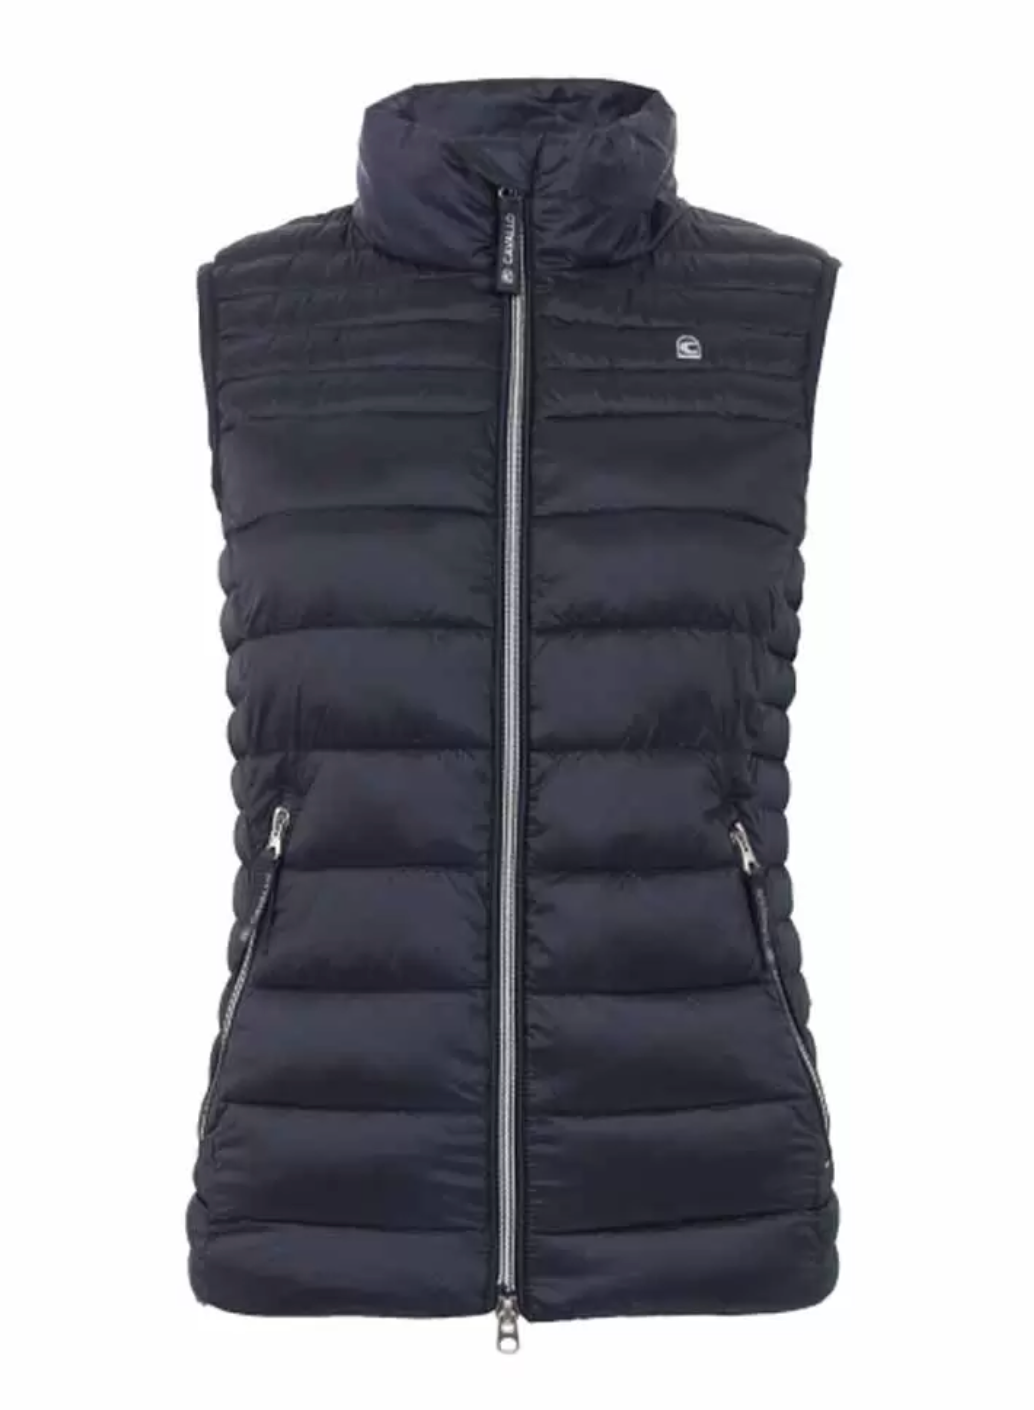 Cavallo Elexa Quilted Vest - Equestrian Fashion Outfitters